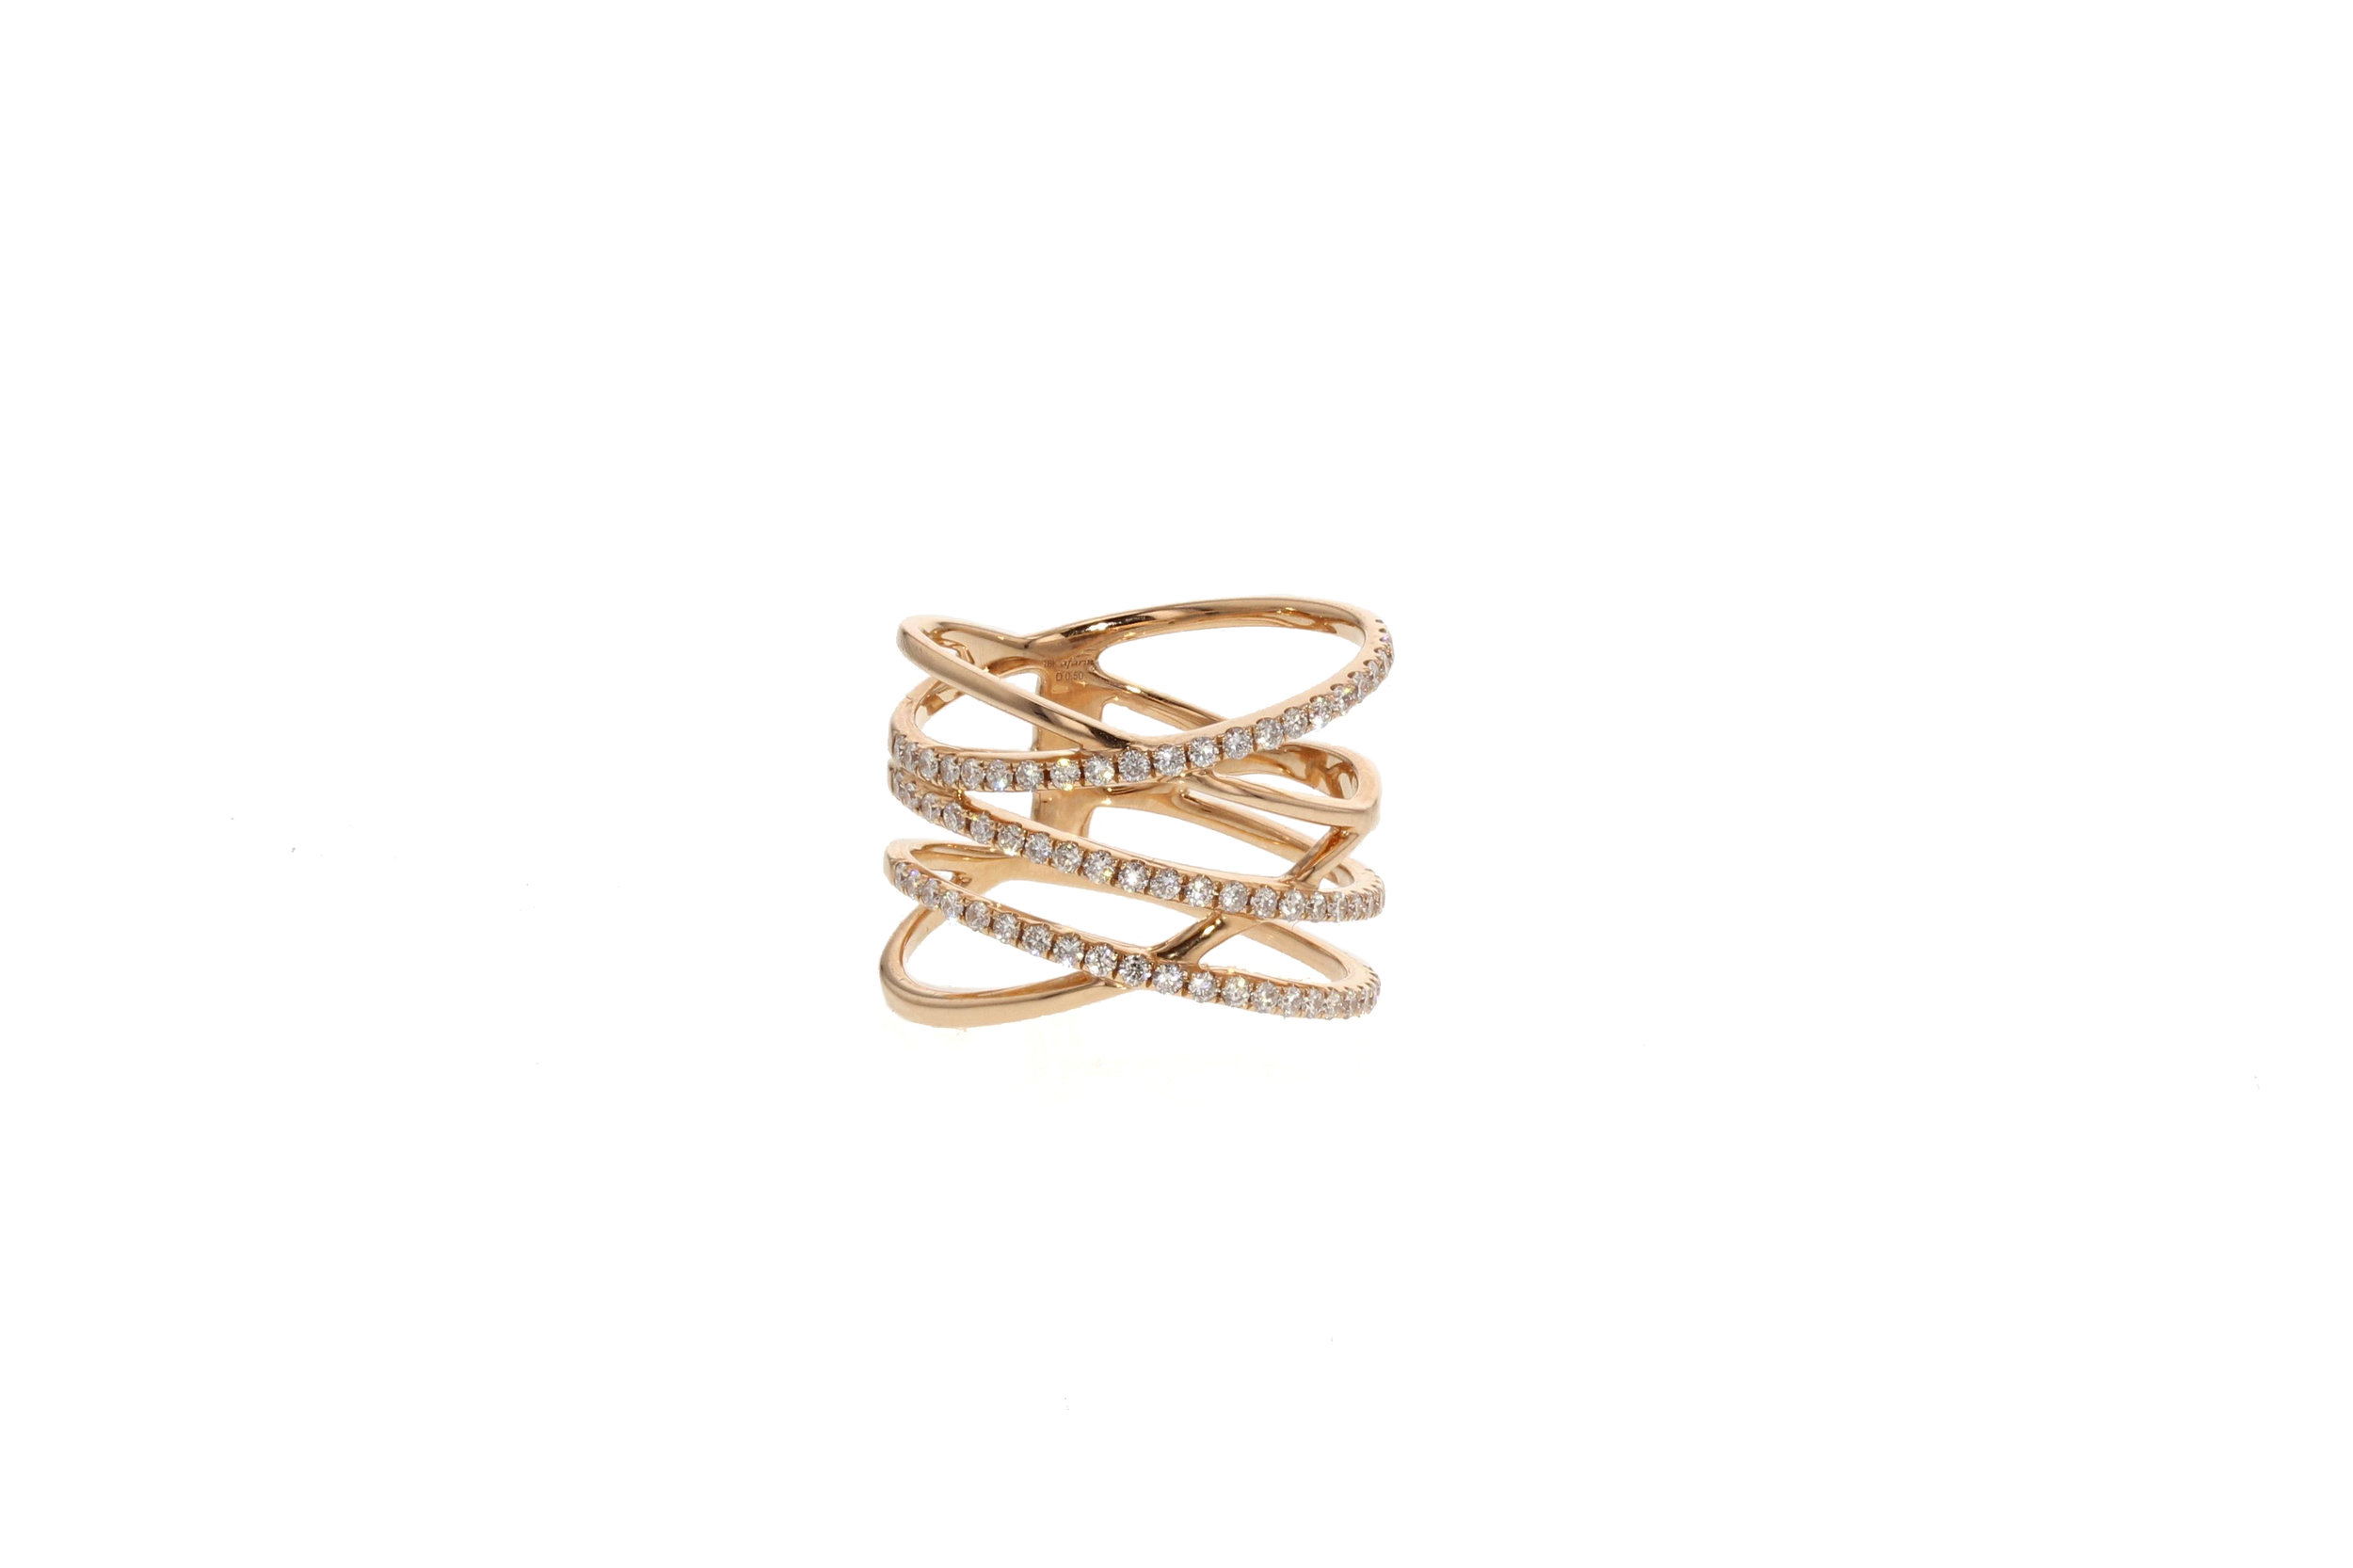 18kt Rose Gold Double Criss Cross Ring 0.50 tcw.&nbsp;$3625